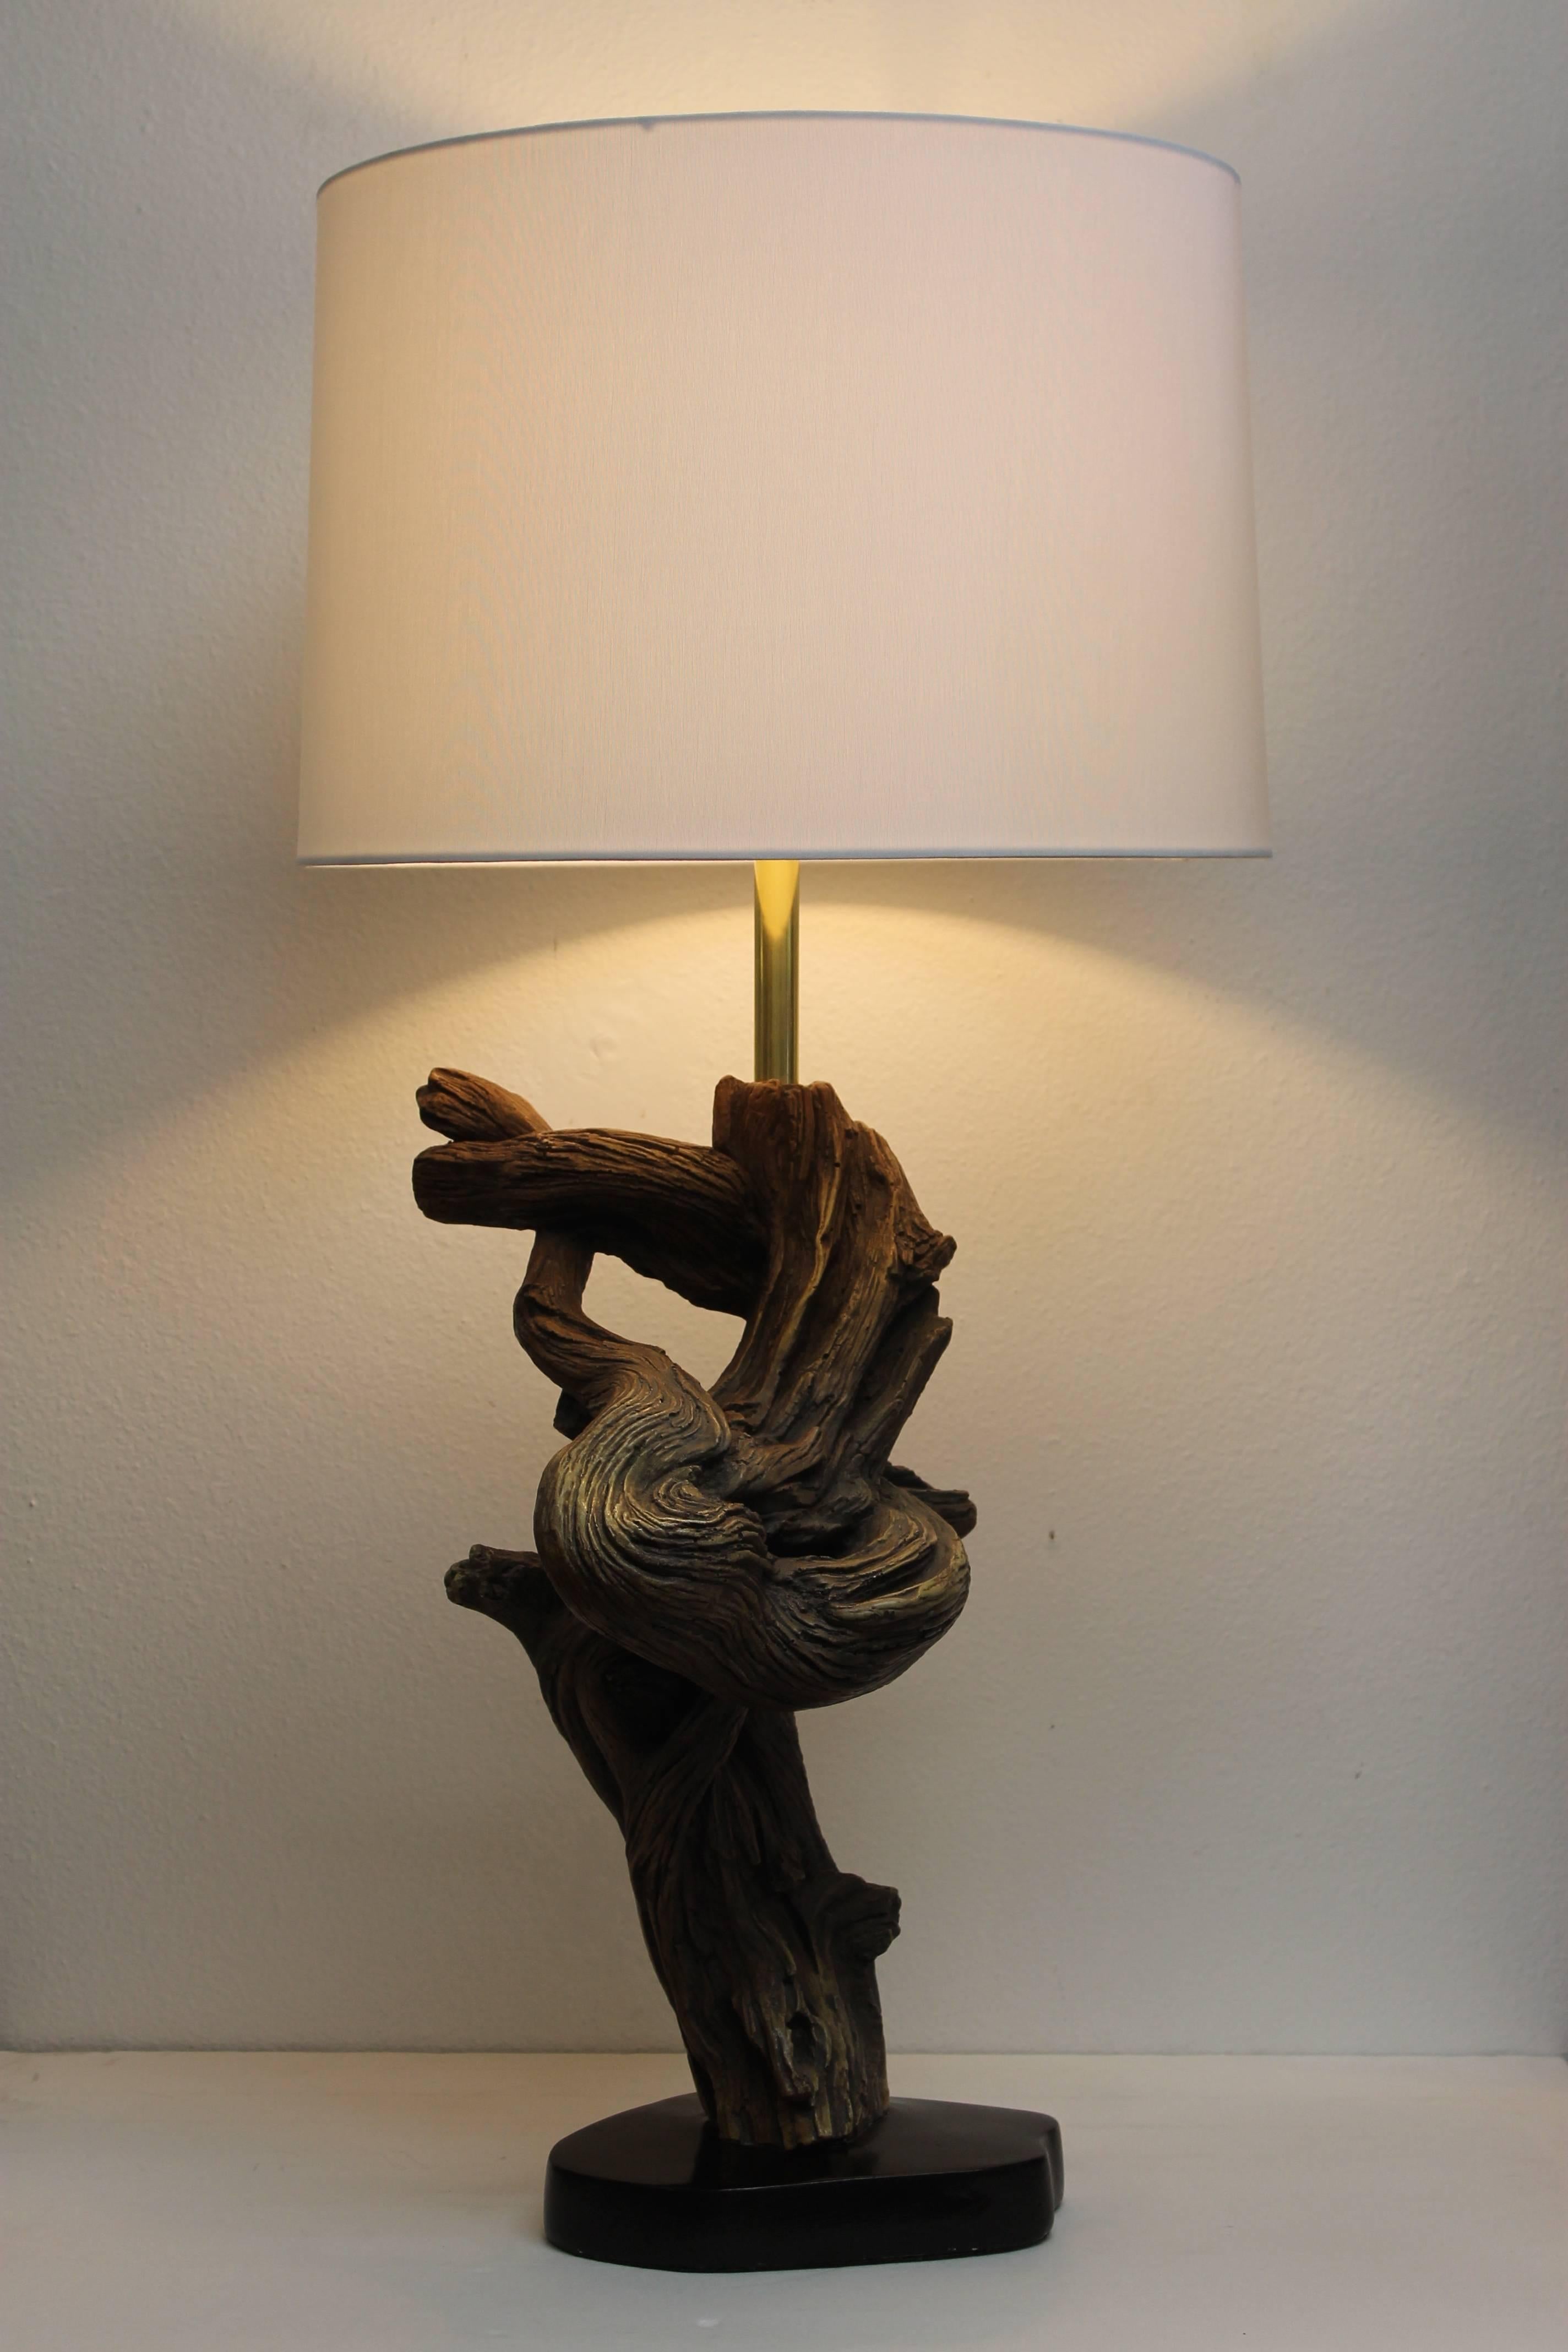 Ceramic faux driftwood lamp. Ceramic portion is 10